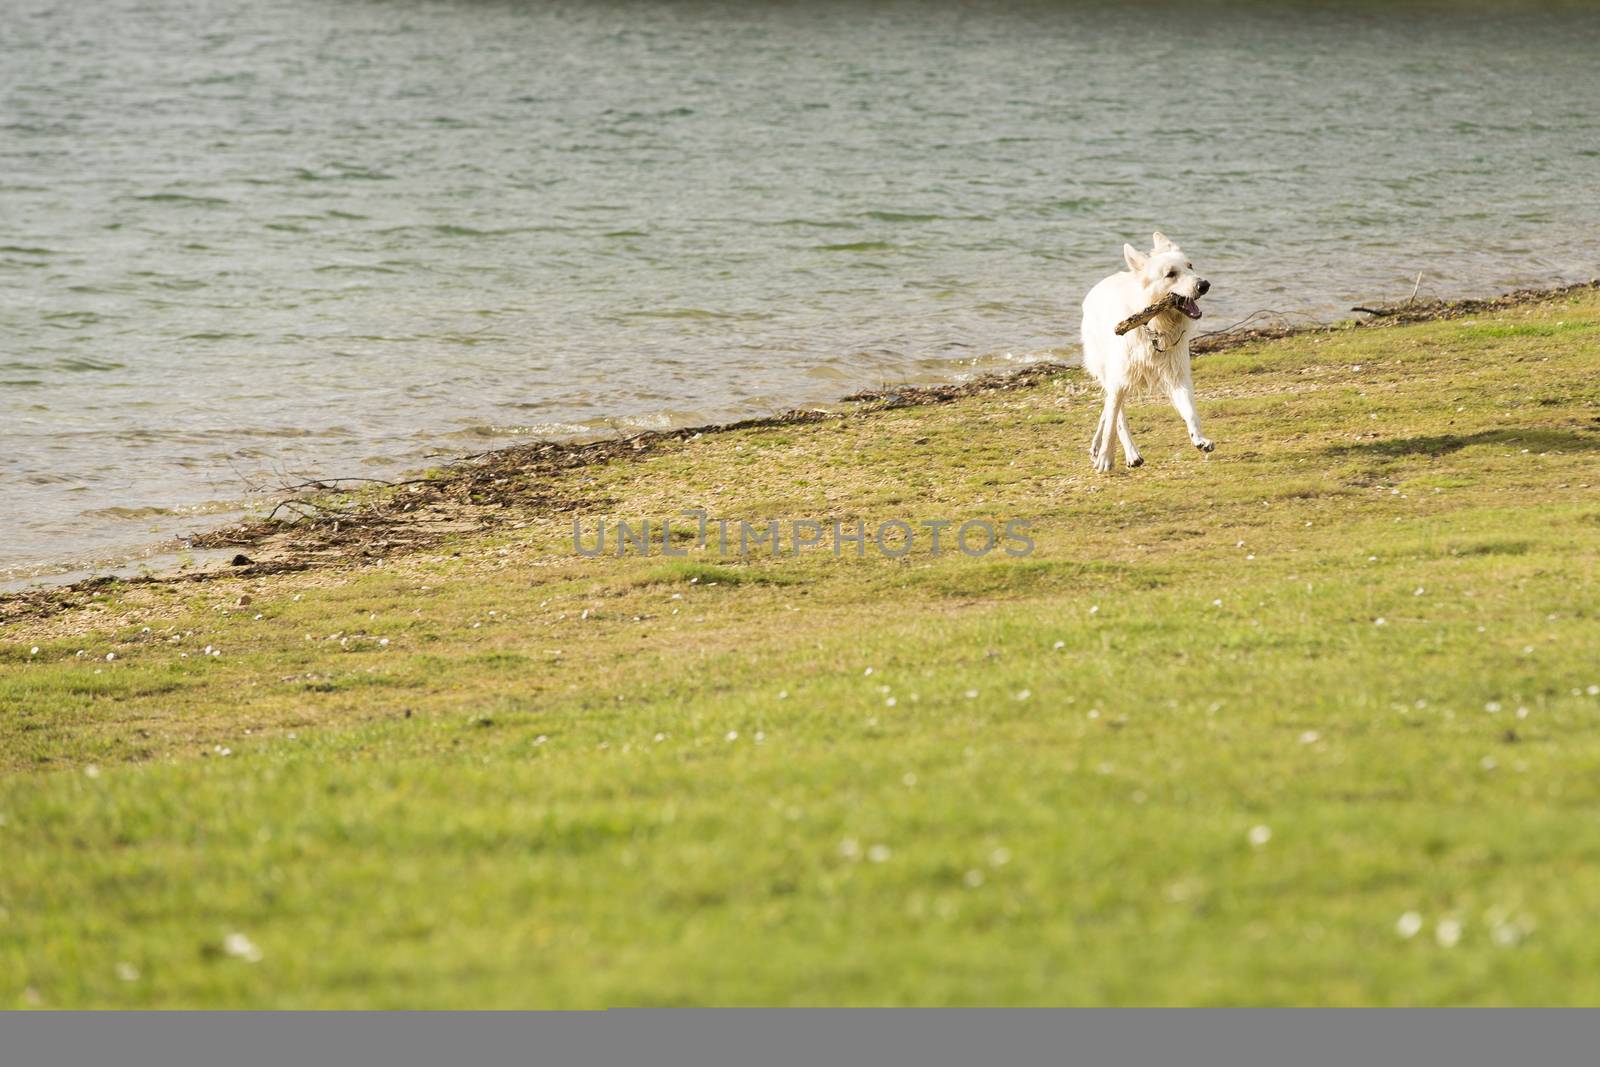 White big dog playing in water and running on grass